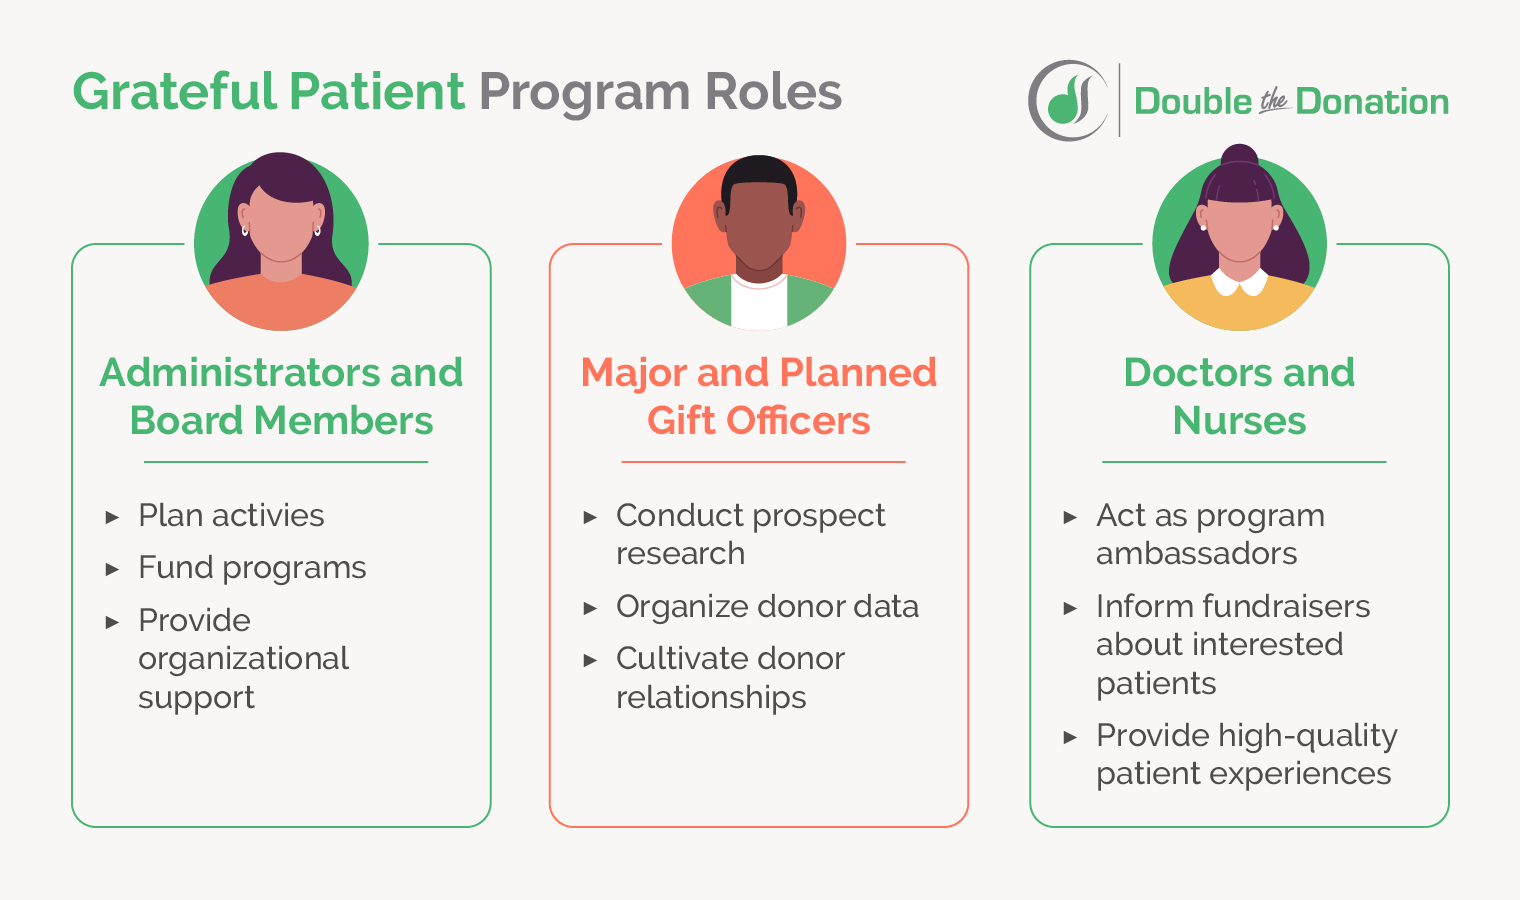 Grateful Patient program roles for various staff members are listed and written out below. 